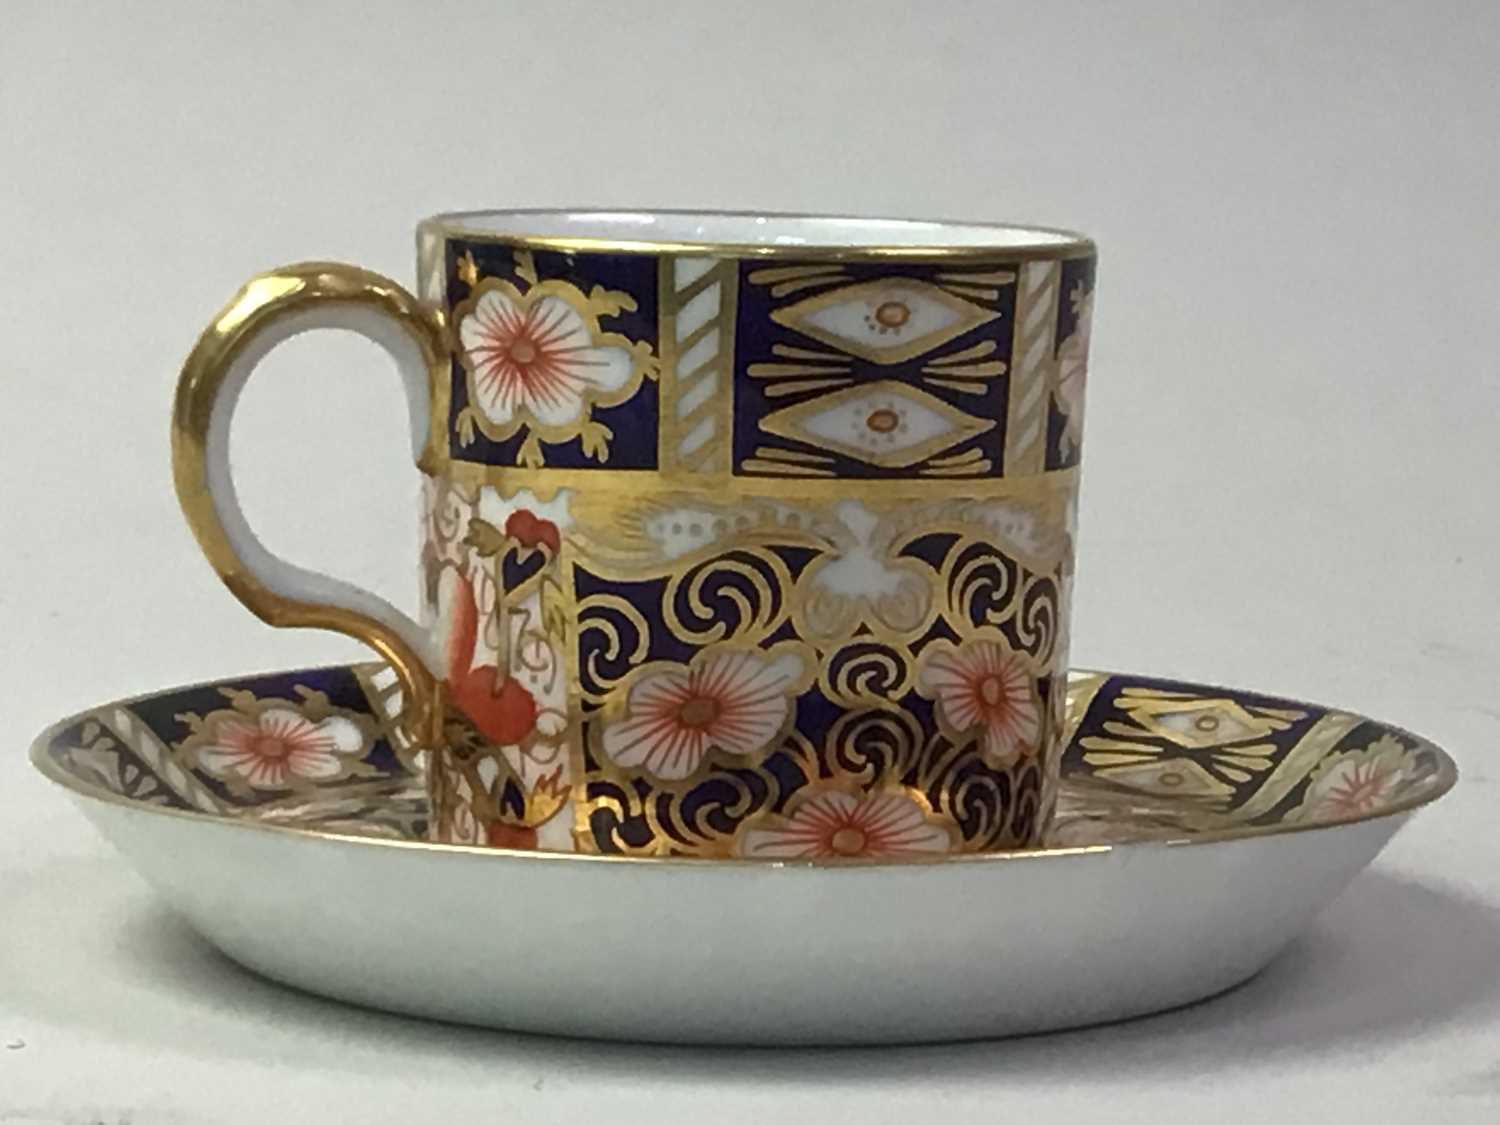 ROYAL CROWN DERBY COFFEE CUP AND SAUCER, ALONG WITH OTHER MIXED CERAMICS